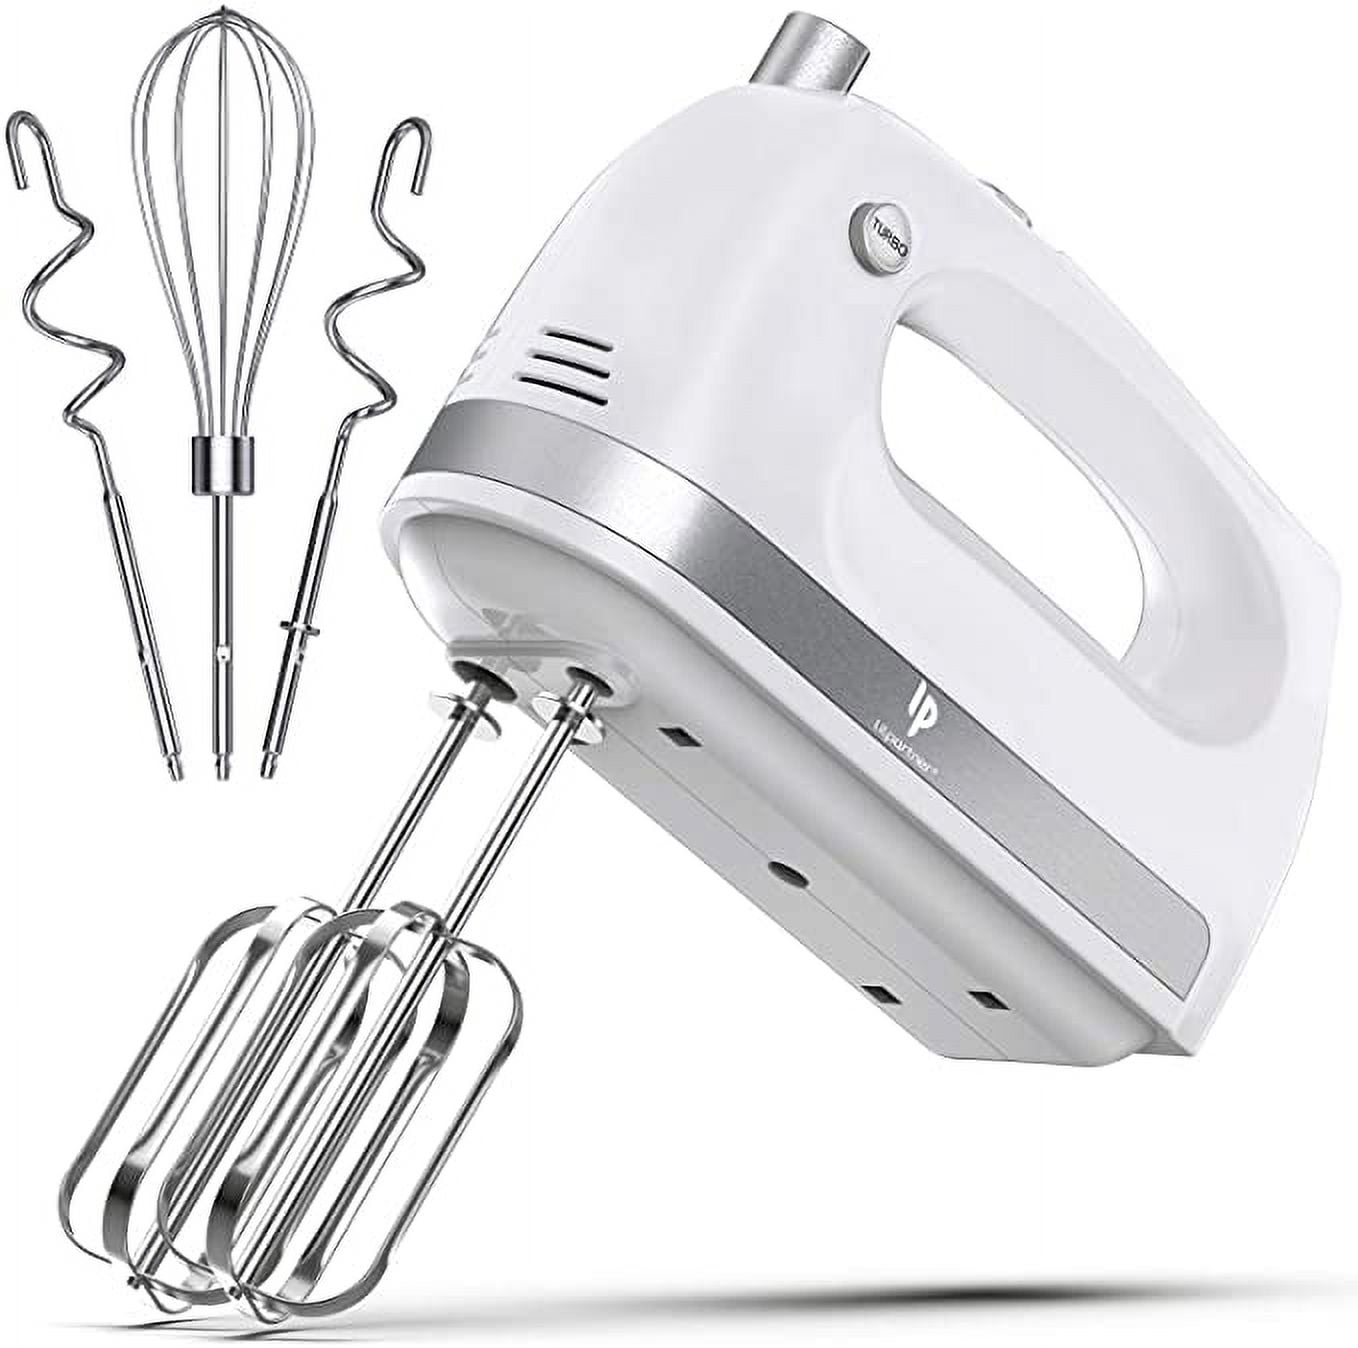 LILPARTNER Hand Mixer Electric, 400w Ultra Power Kitchen Hand Mixer With 2  5-Speed(Turbo Boost, Automatic Speed) & 5 Stainless Steel Accessories for  Whipping Dough, Cream, Cake, Eject Button (White) 